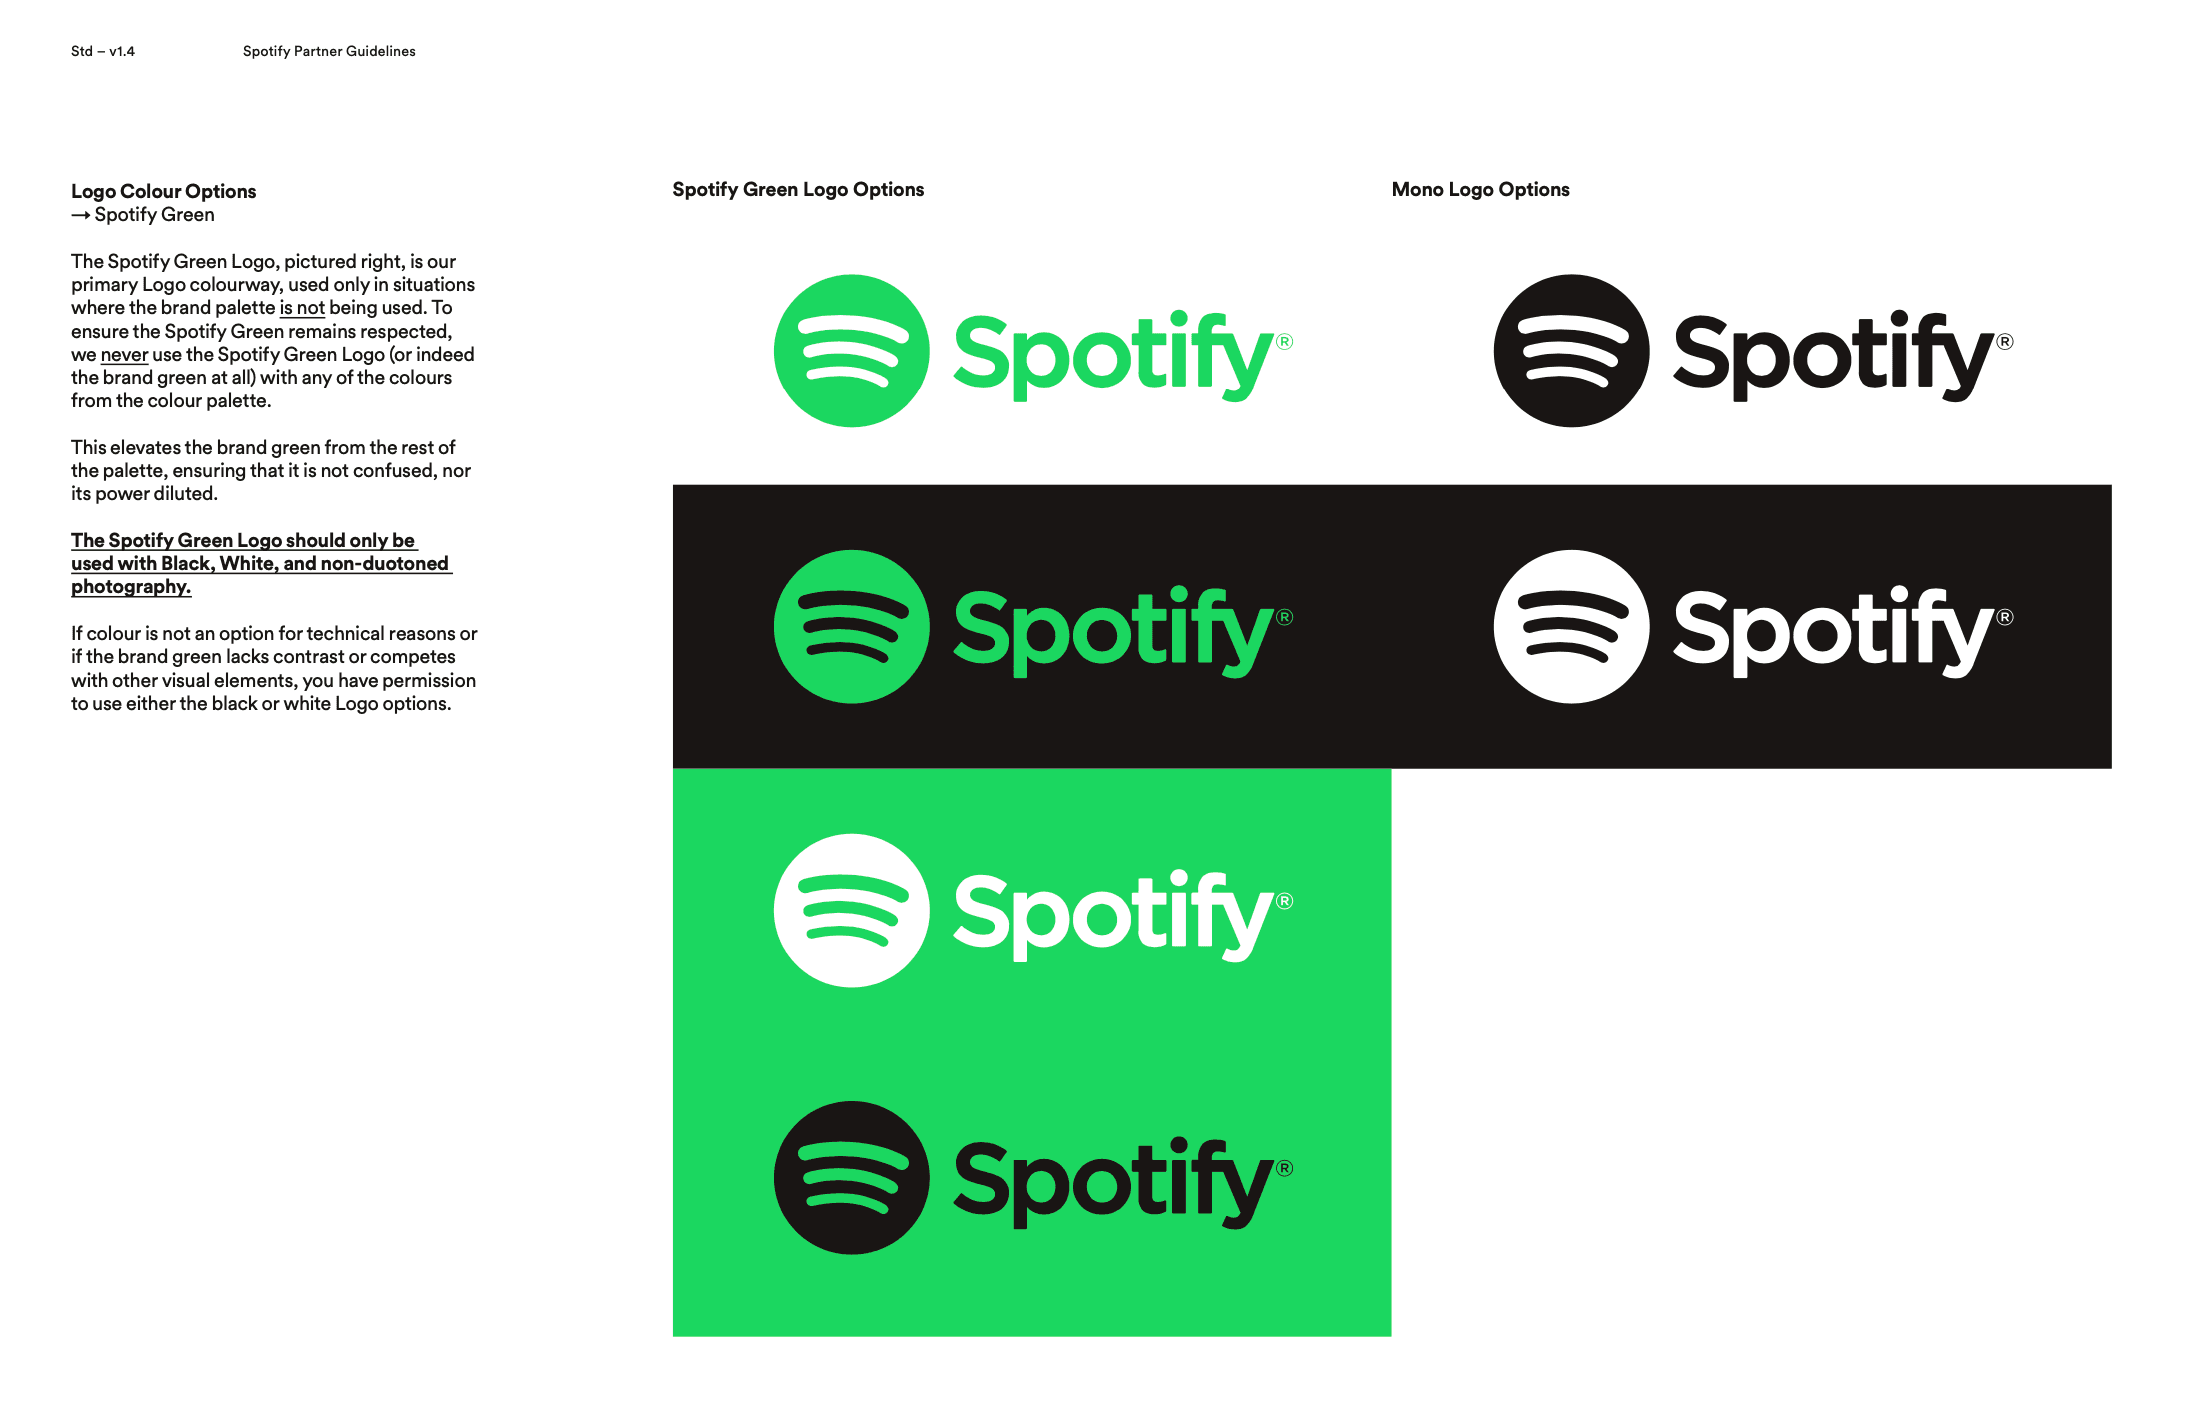 Brand Guidelines by Spotify